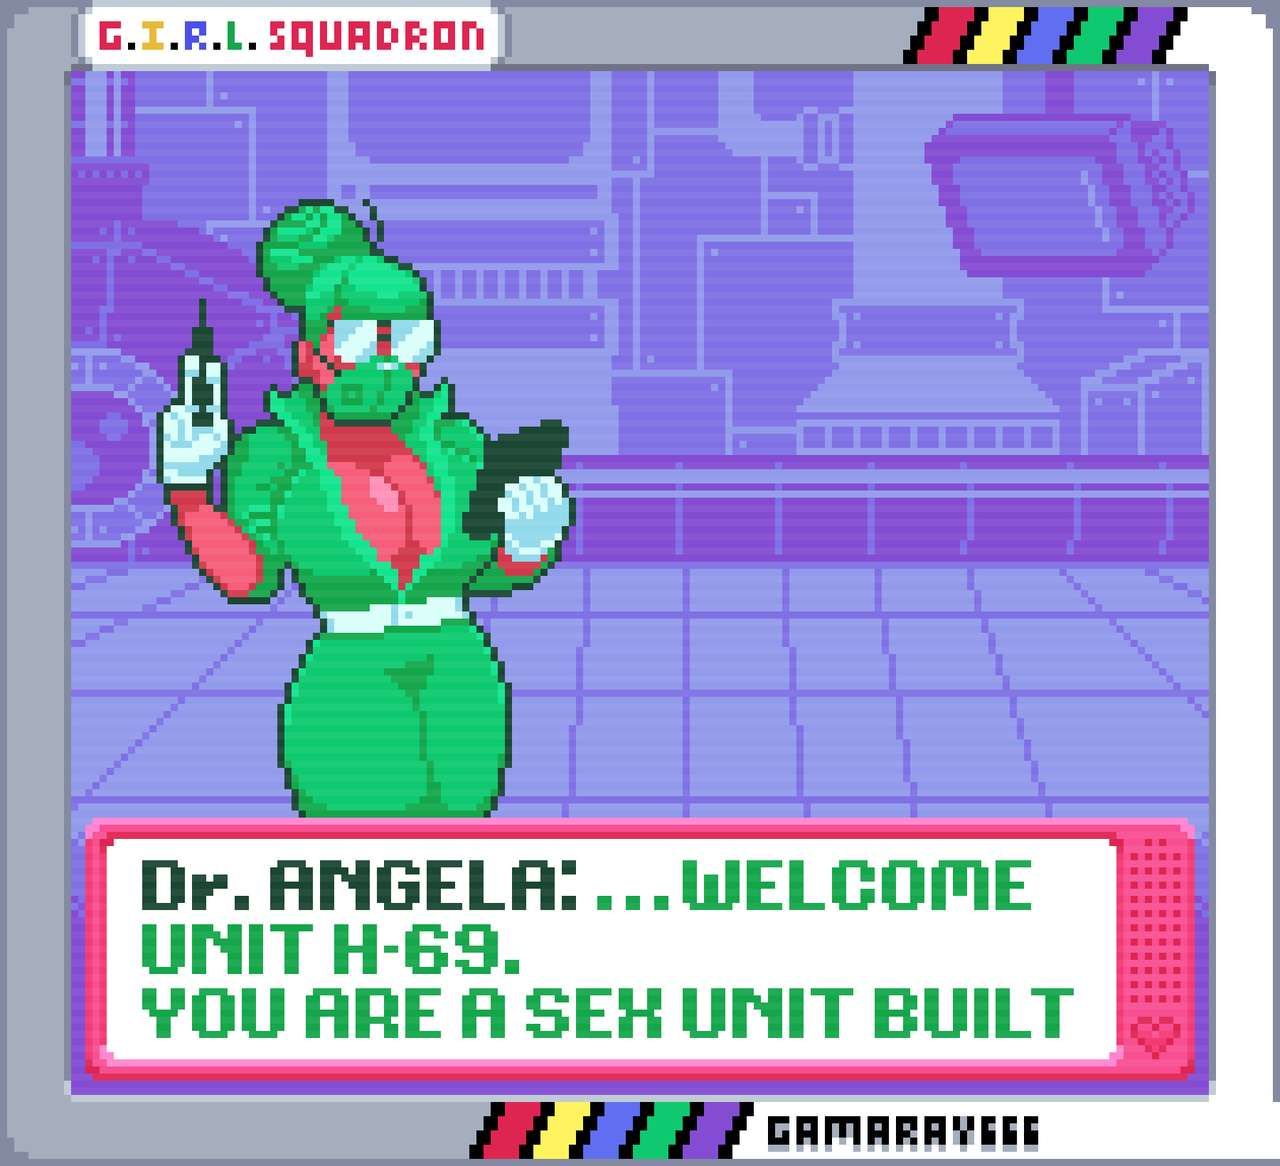 G. I. R. L. SQUADRON - A Choose Your Own Adventure 2